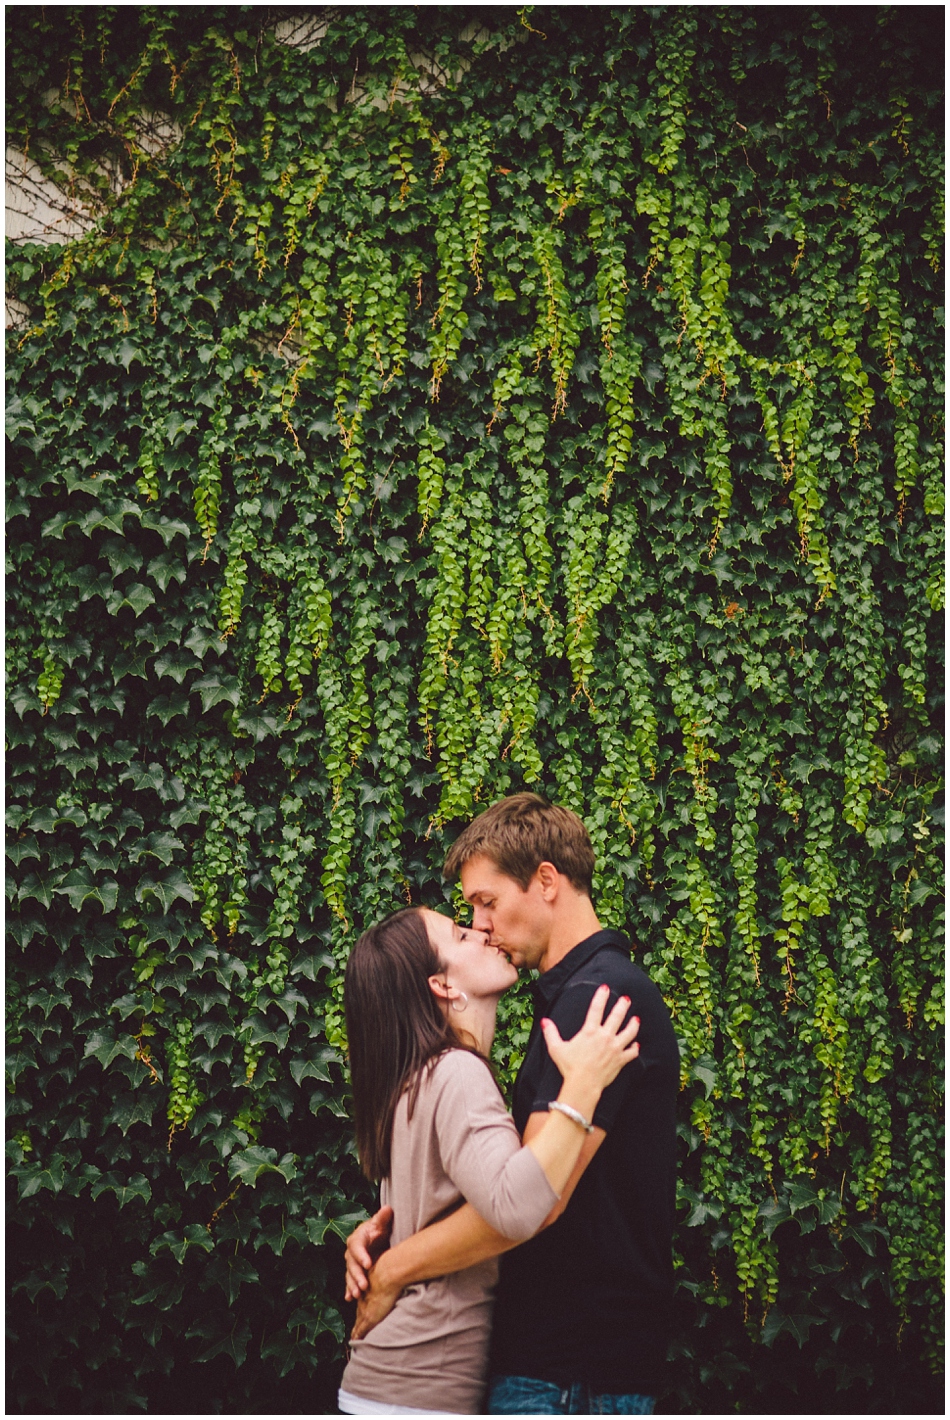 engaged couple kissing in front of green ivy wall